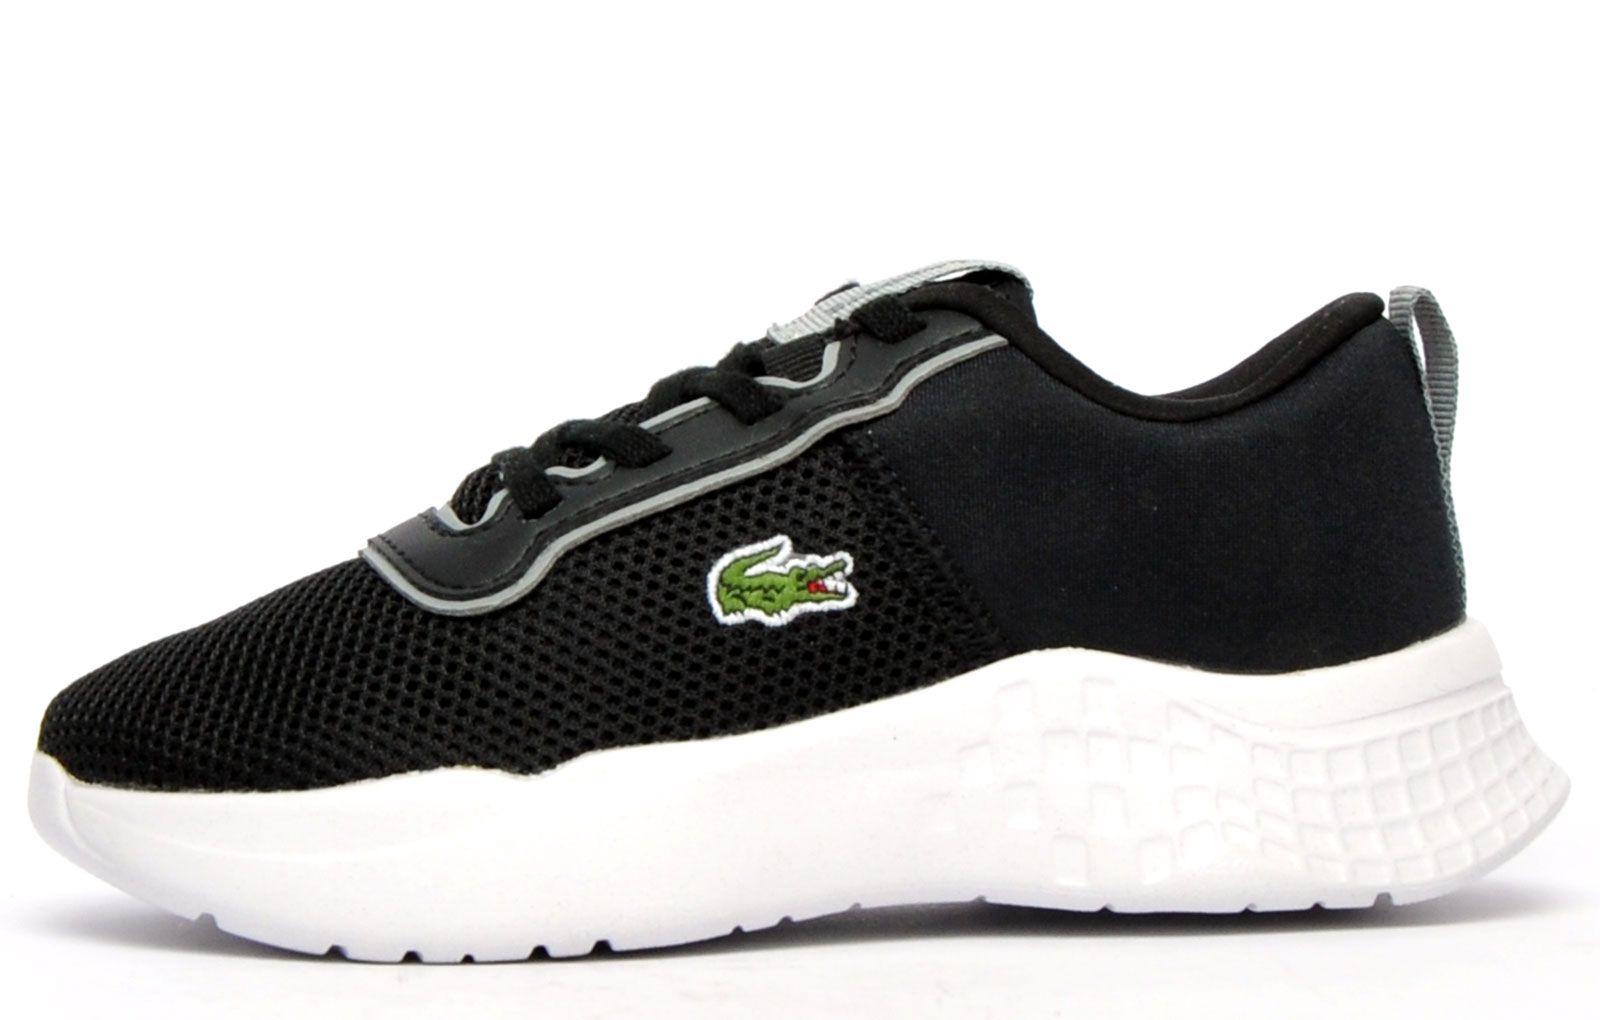 Its time to take your athleisure looks to a new level in the Court-Drive, a super comfy trainer which is great for all types of wear. This versatile model features a 3D-generated texture wrap on the midsole for superior cushioning and support whilst the highly breathable upper construction delivers the best of support and looks perfect for athleisure wear. Eye-catching Lacoste croc branding sits at the mid-section of the upper and tongue delivering high impact brand visibility and head turning looks 
 
 - Textile mesh / synthetic mix upper
 - Padded heel and ankle collar
 - Cushioned midsole
 - Lace up fit and feel
 - Durable outsole
 - Heel loop for easy on / off wear
 - Iconic Lacoste branding throughout
 
 Please Note: 
 These Lacoste trainers are sold as B grades which means there may be some very slight cosmetic issues on the shoe and they come in a Lacoste box with the Lacoste brand authenticity details attached to it. We have checked every pair of these shoes and in our opinion at these heavily reduced prices all are very saleable. All shoes are guaranteed against fair wear and tear and offer a substantial saving against the normal high street price. The overall function or performance of the shoe will not be affected by cosmetic issues. B Grades are original authentic products released by the brand manufacturer with their approval at greatly reduced prices. If you are unhappy with your purchase we will be more than happy to take the shoes back from you and issue a full refund.